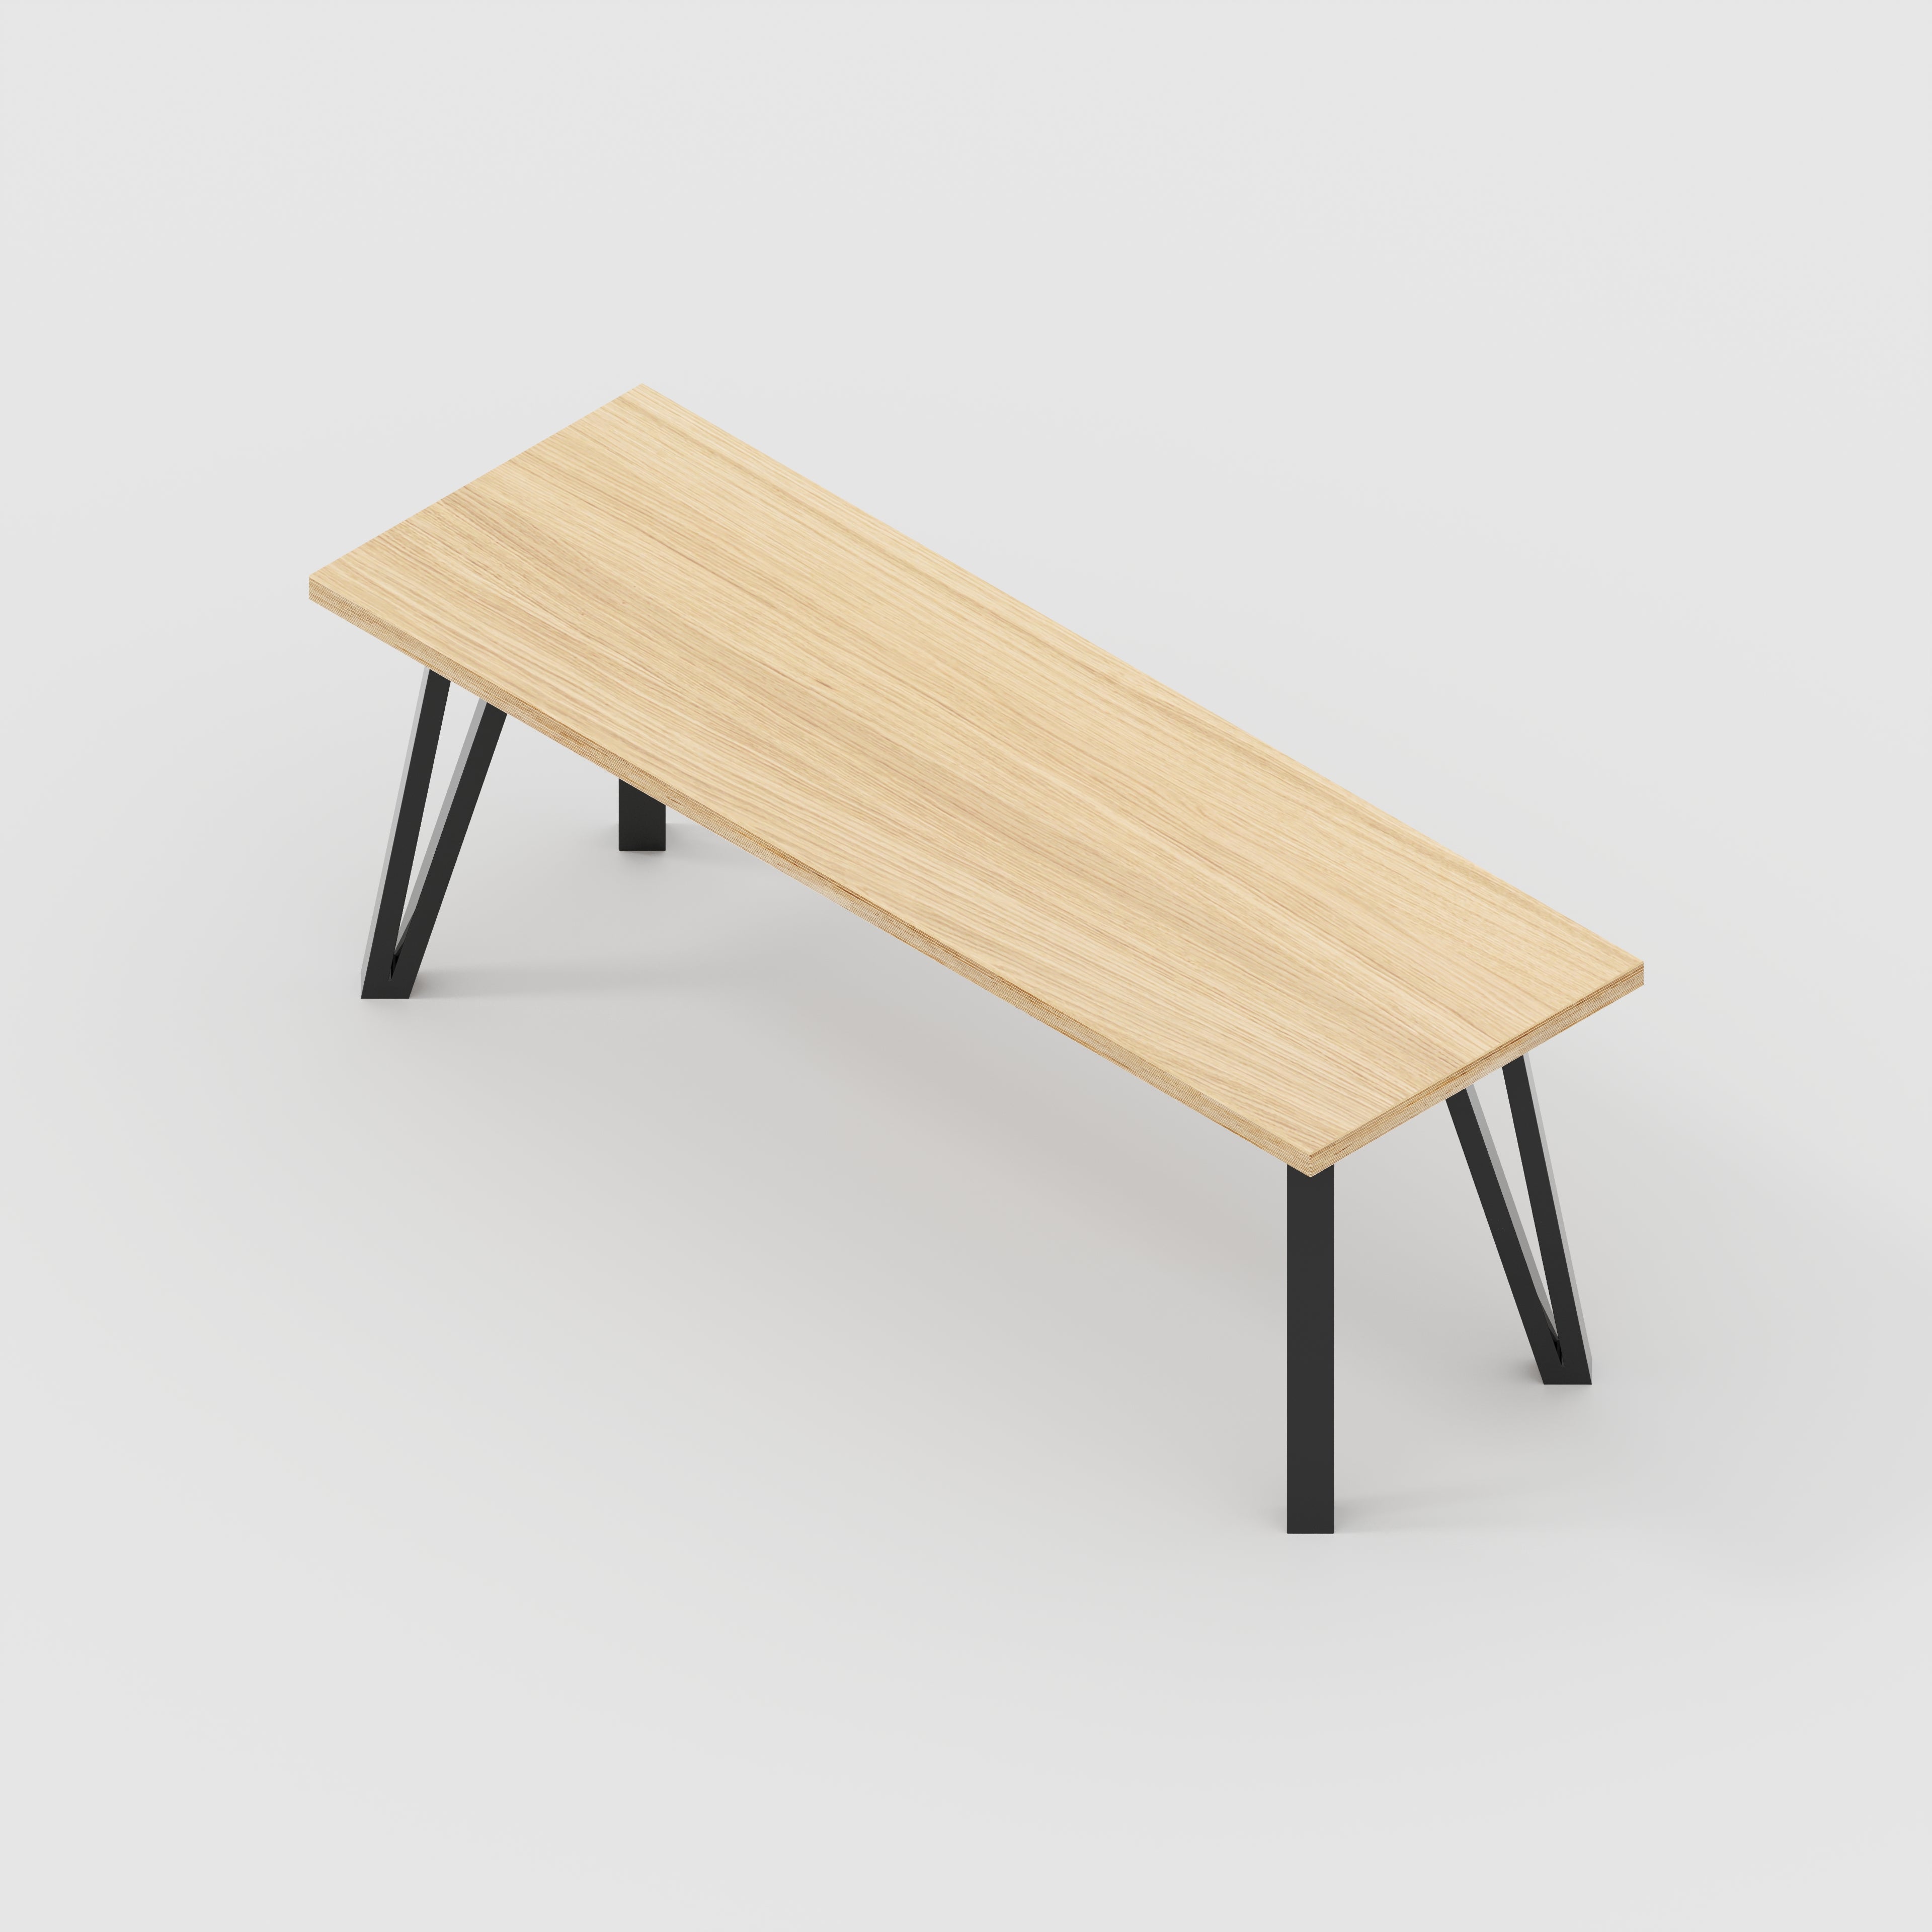 Bench Seat with Black Box Hairpin Legs - Plywood Oak - 1200(w) x 400(d) x 450(h)